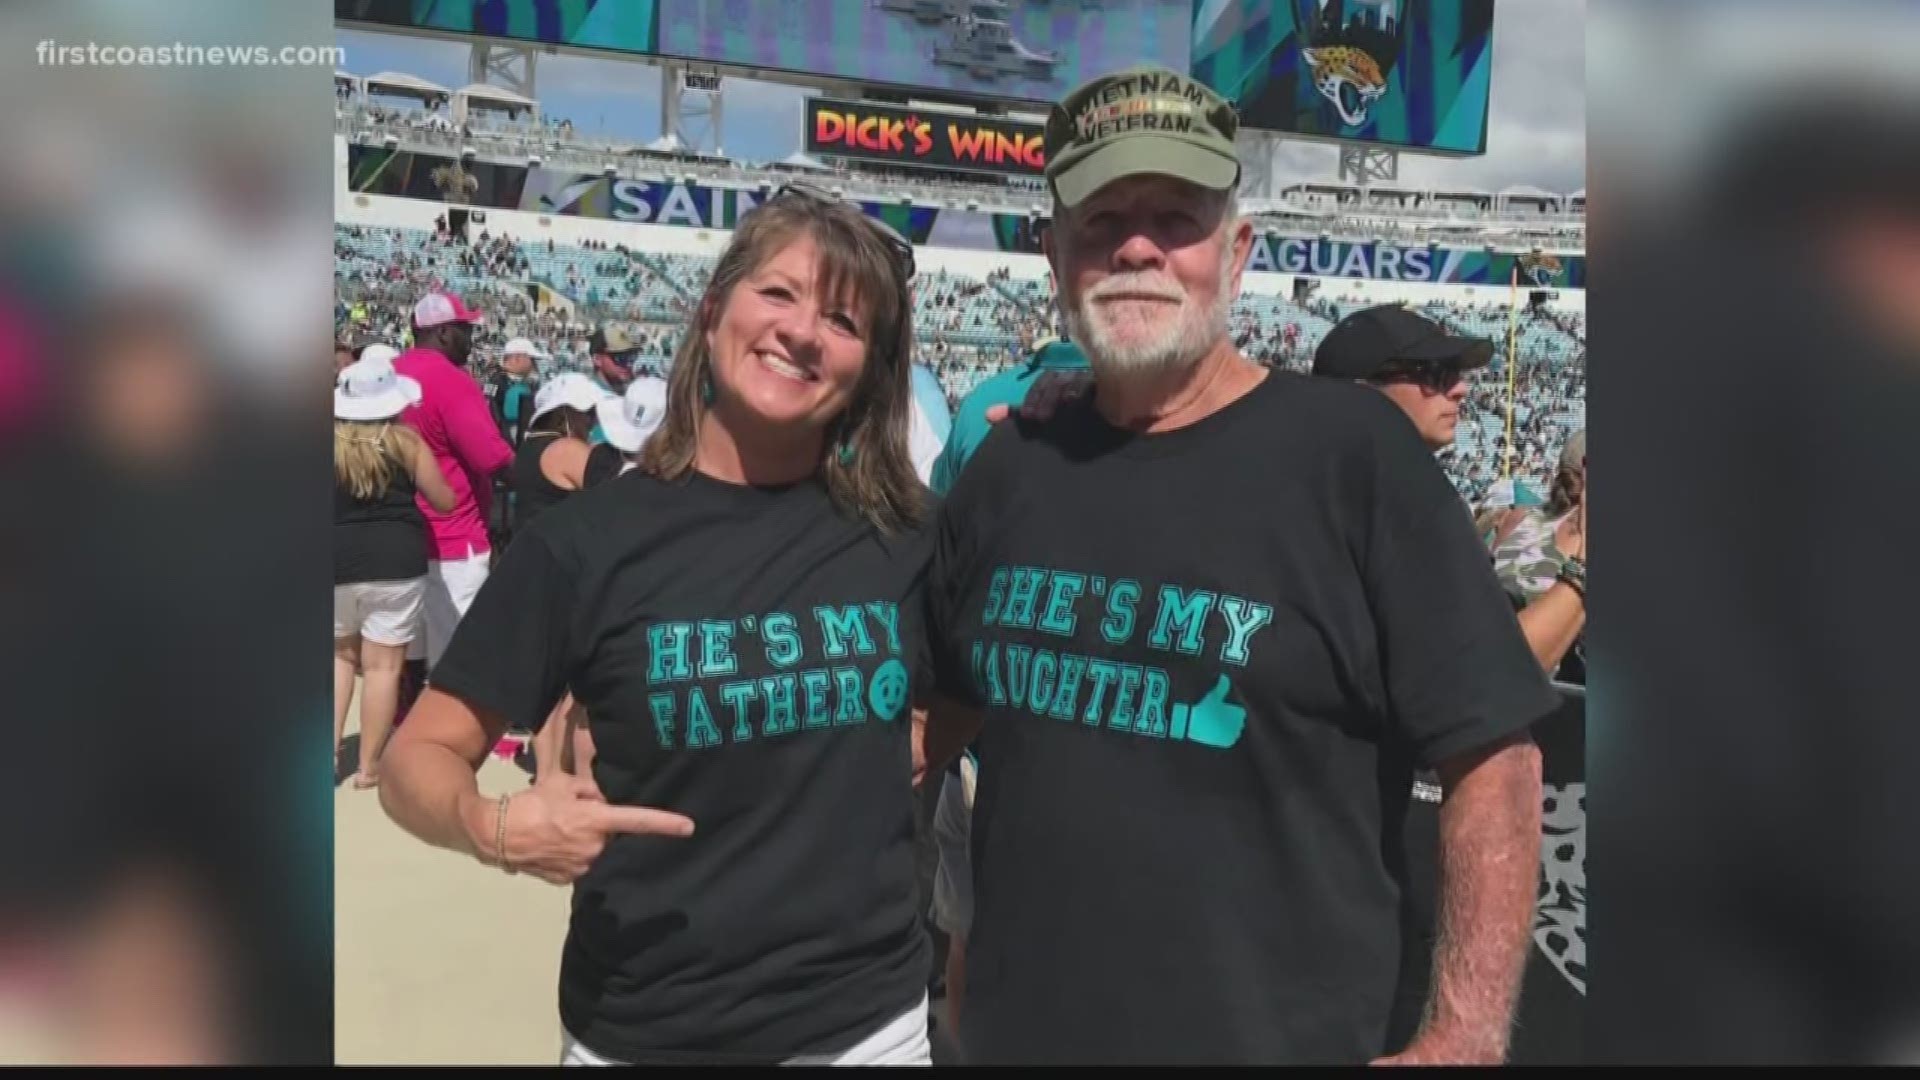 A daughter and her biological father met in March for the first time but recently spent more time together at the Jaguars game.